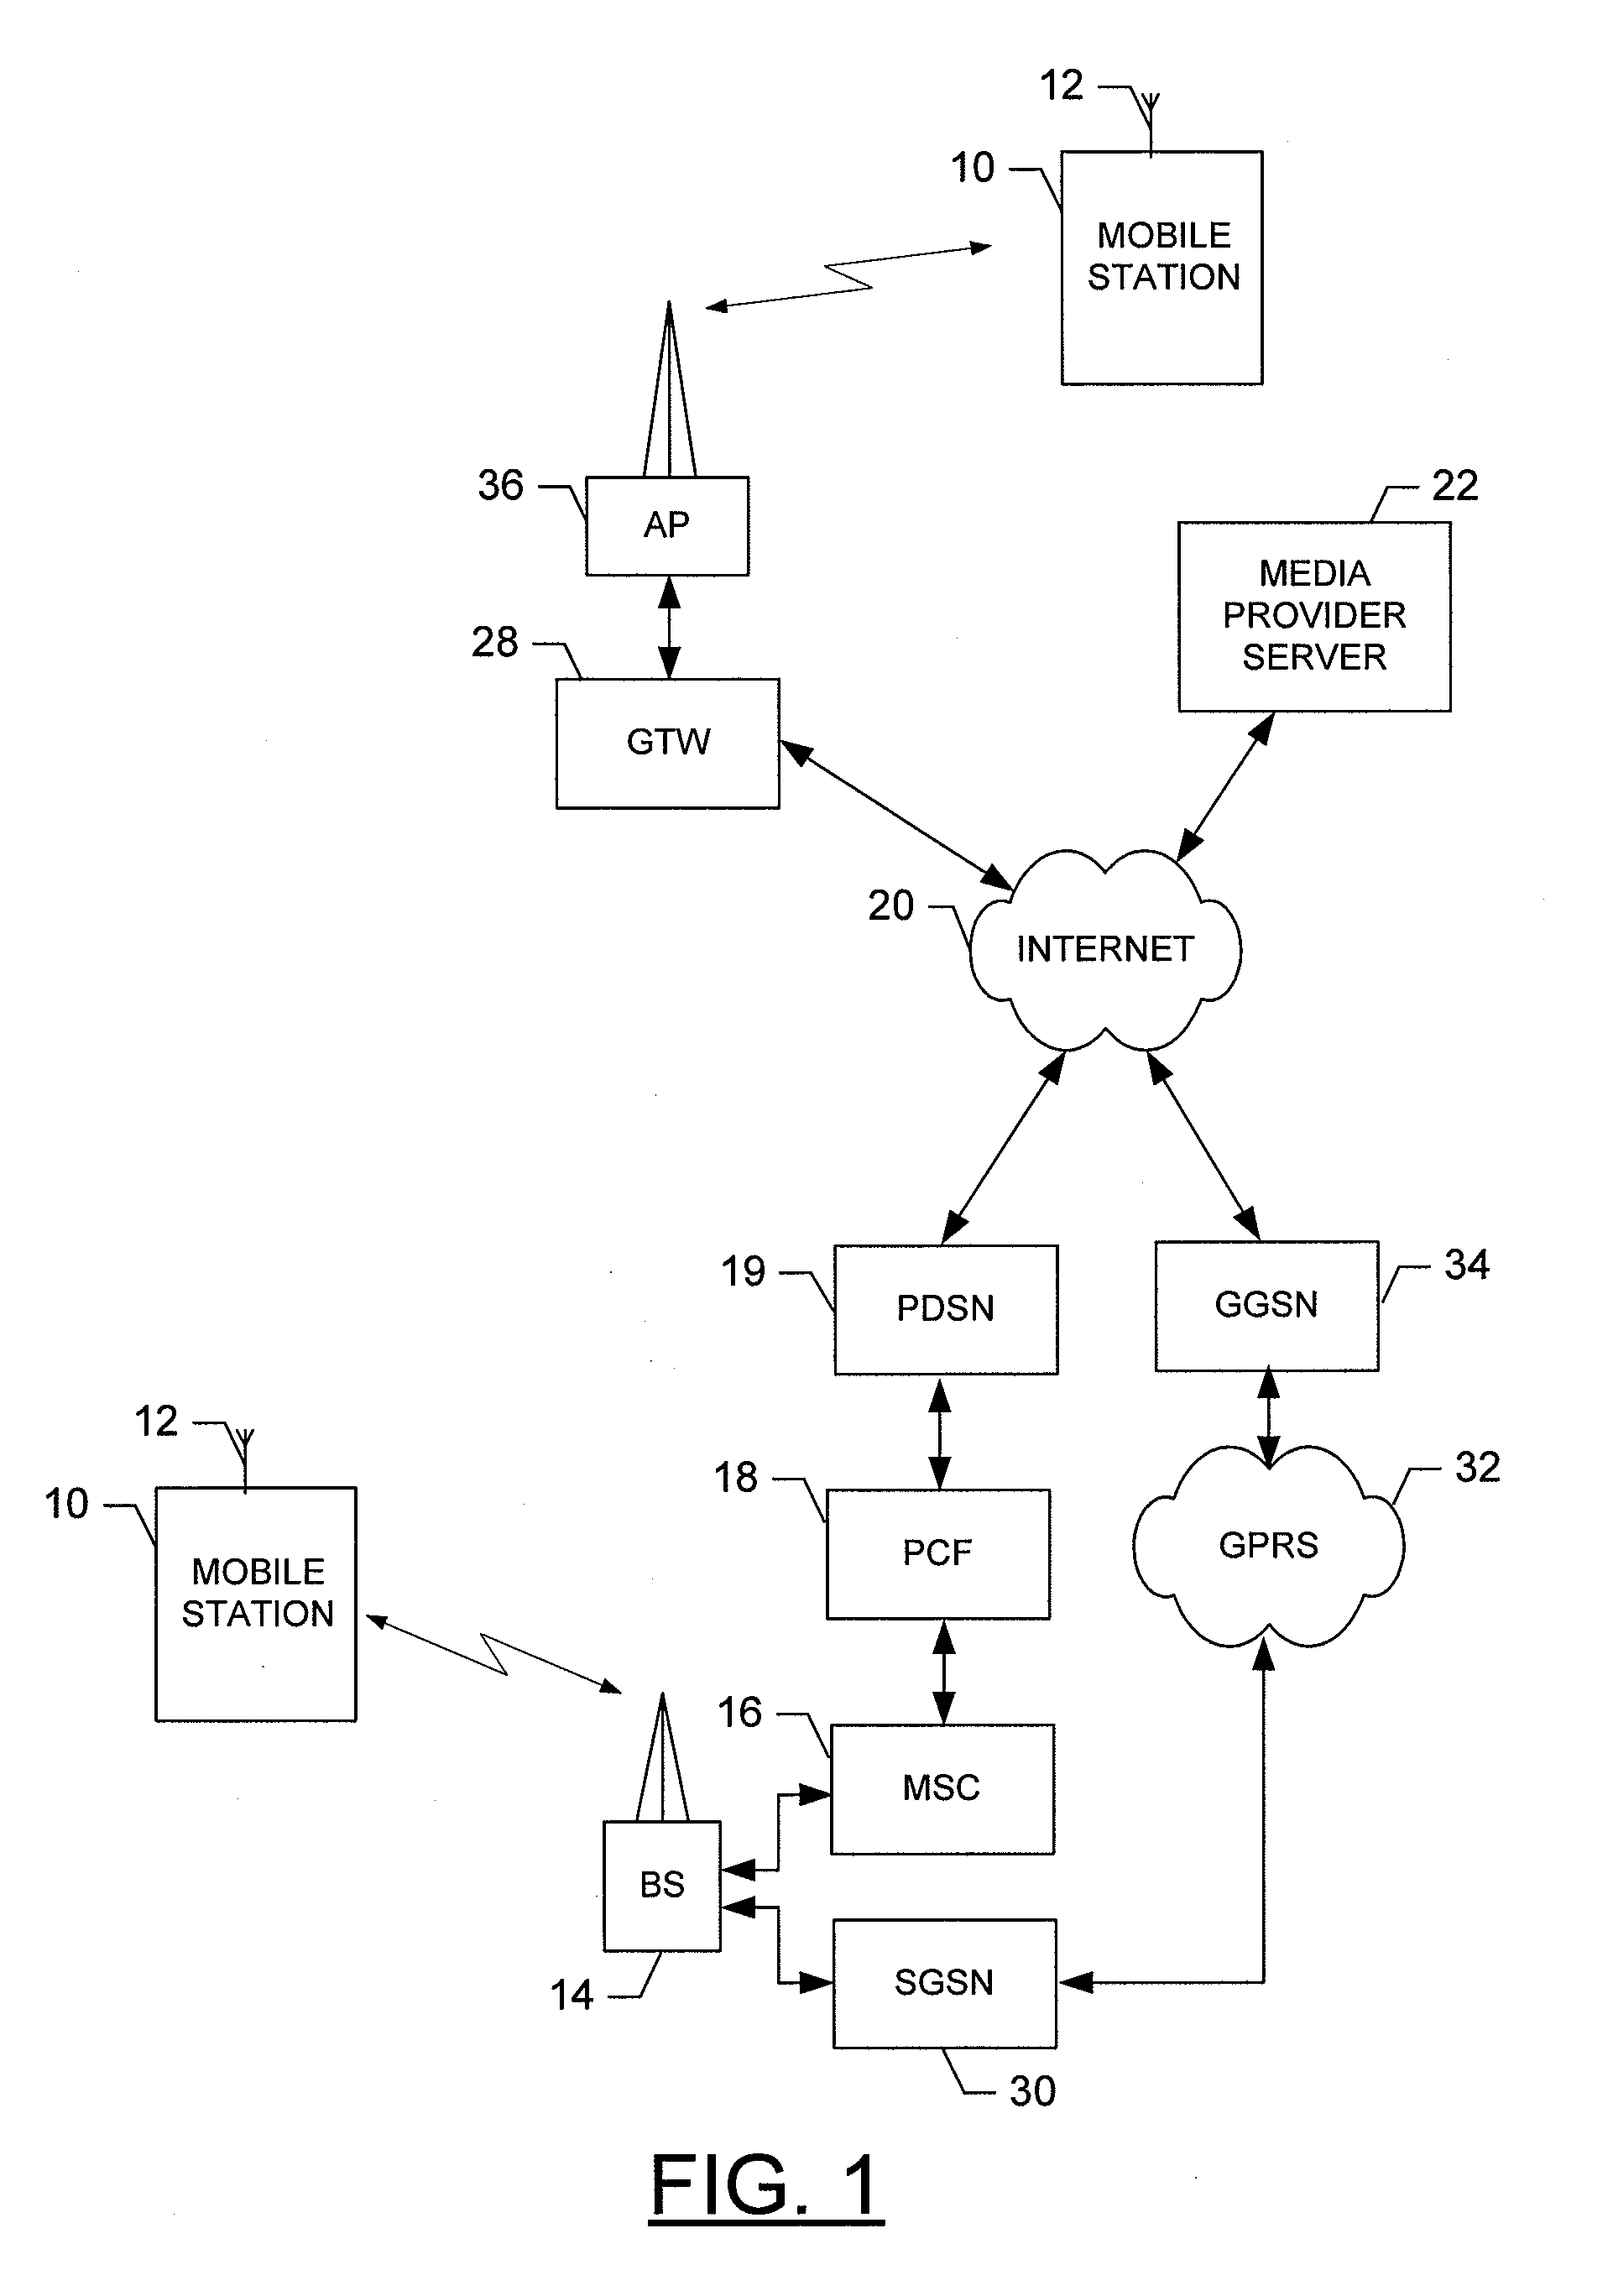 Apparatus, system, method and computer program product for previewing media files